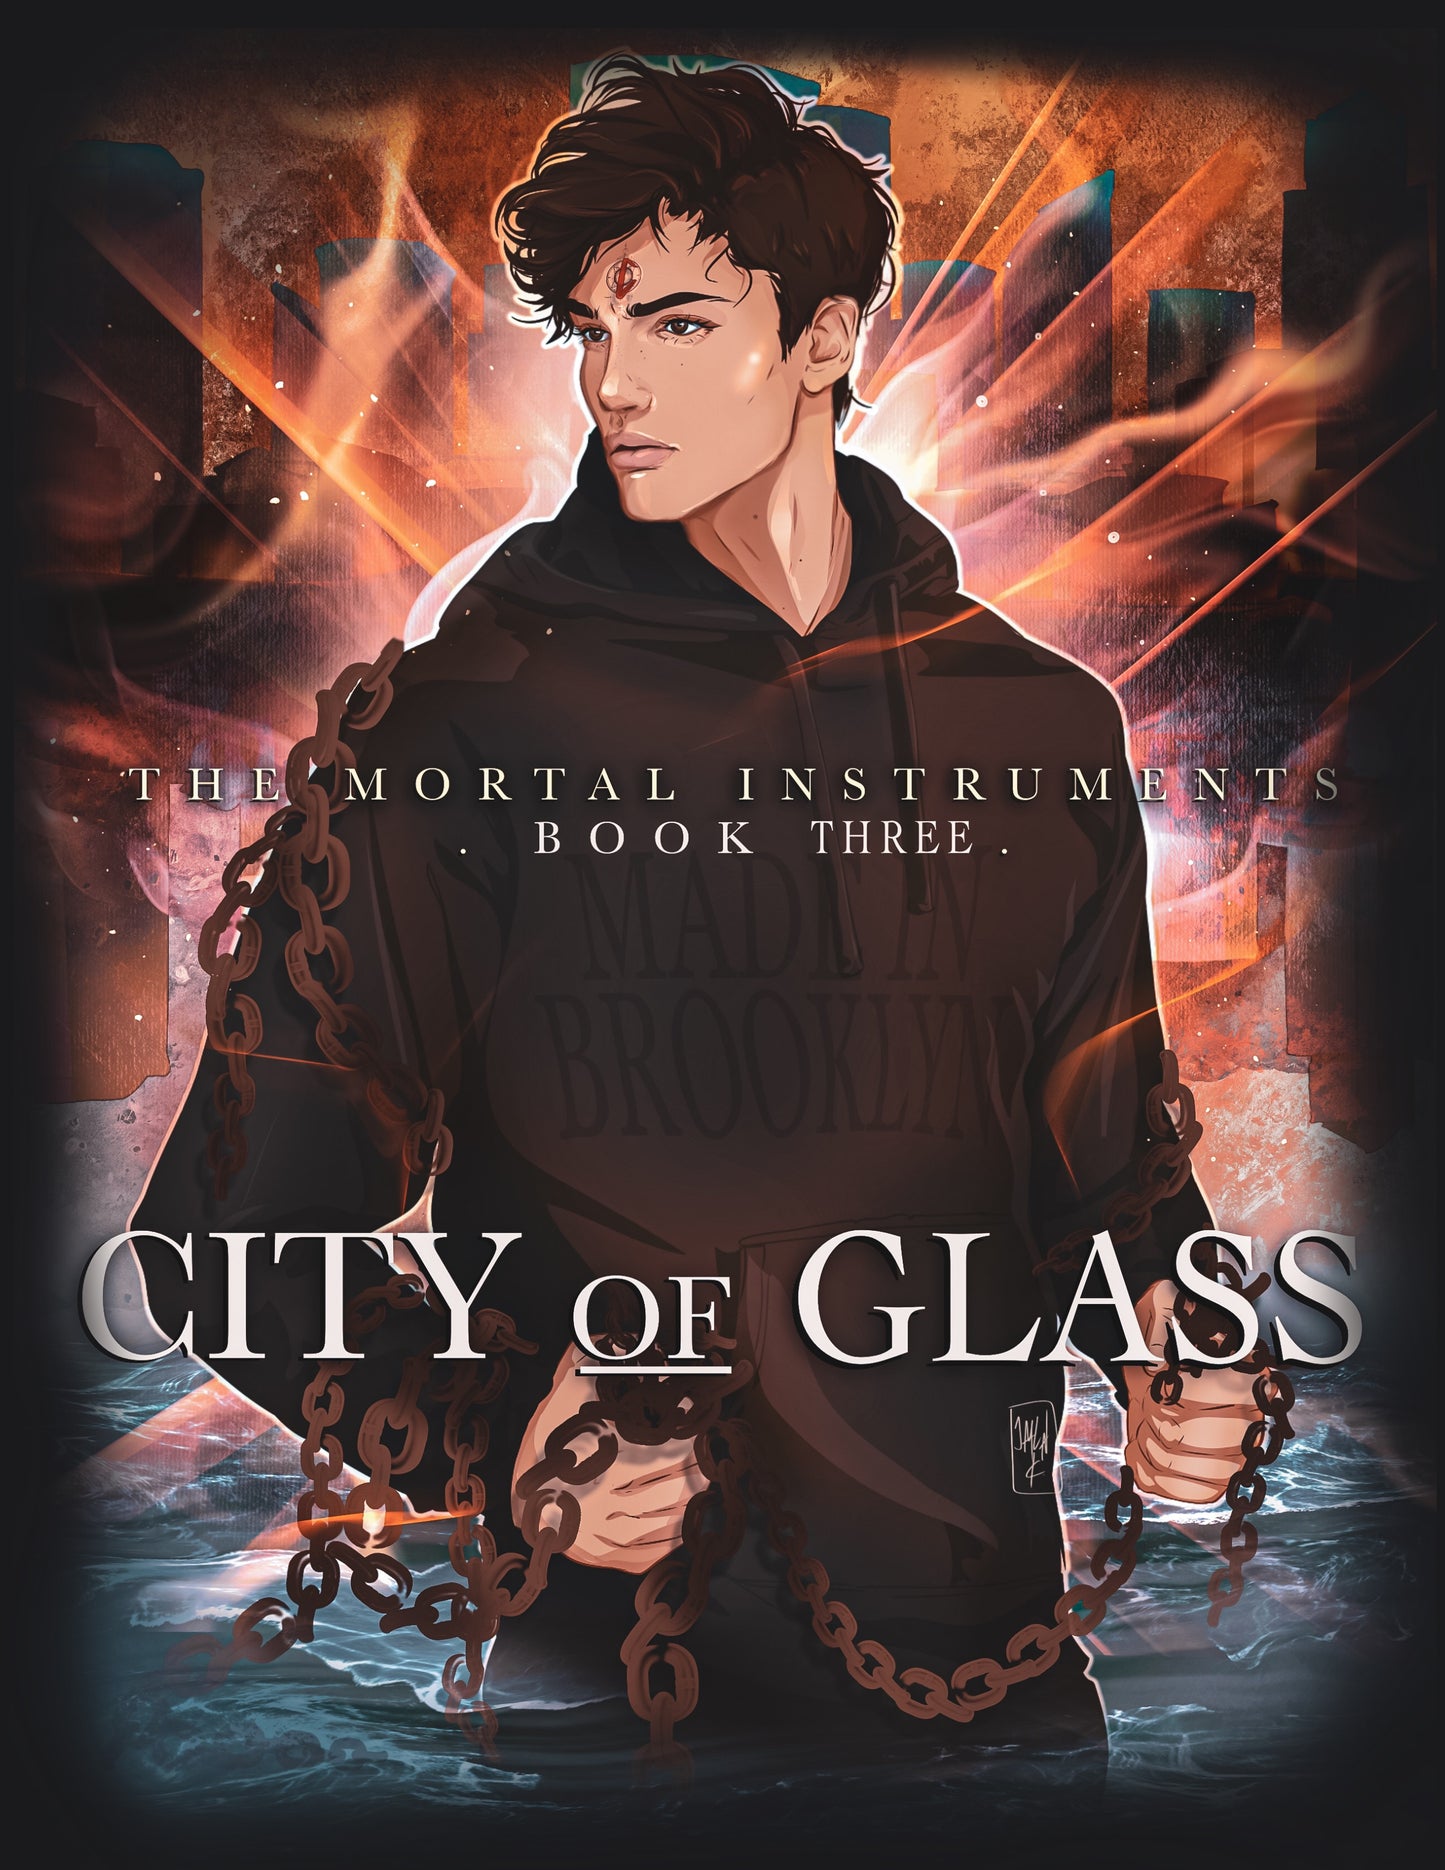 City of Glass Shadowhunters Book Sleeve